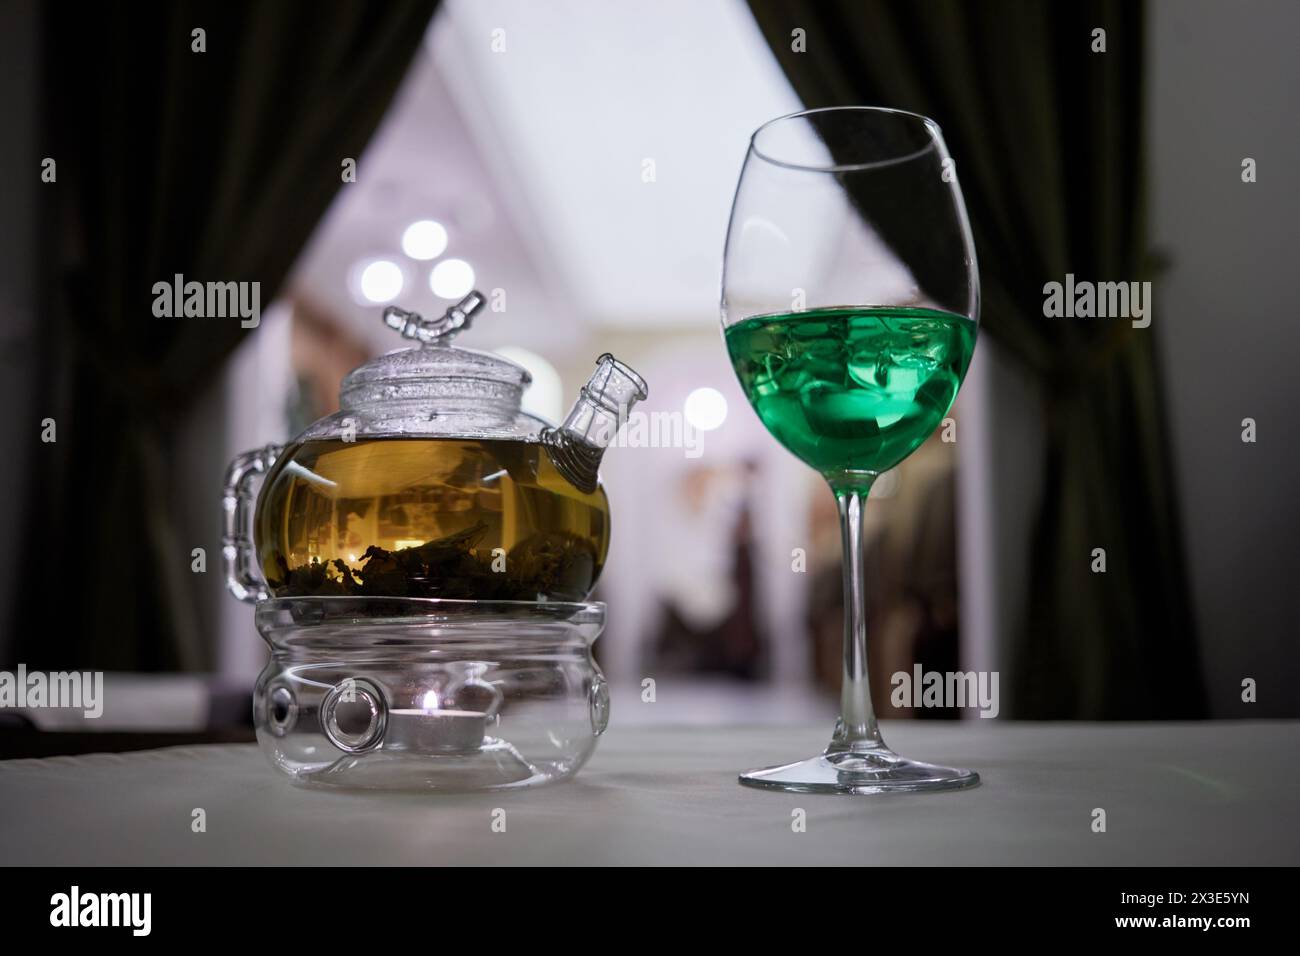 Transparent glass teapot on candle heater and wineglass with green beverage with ice on table. Stock Photo